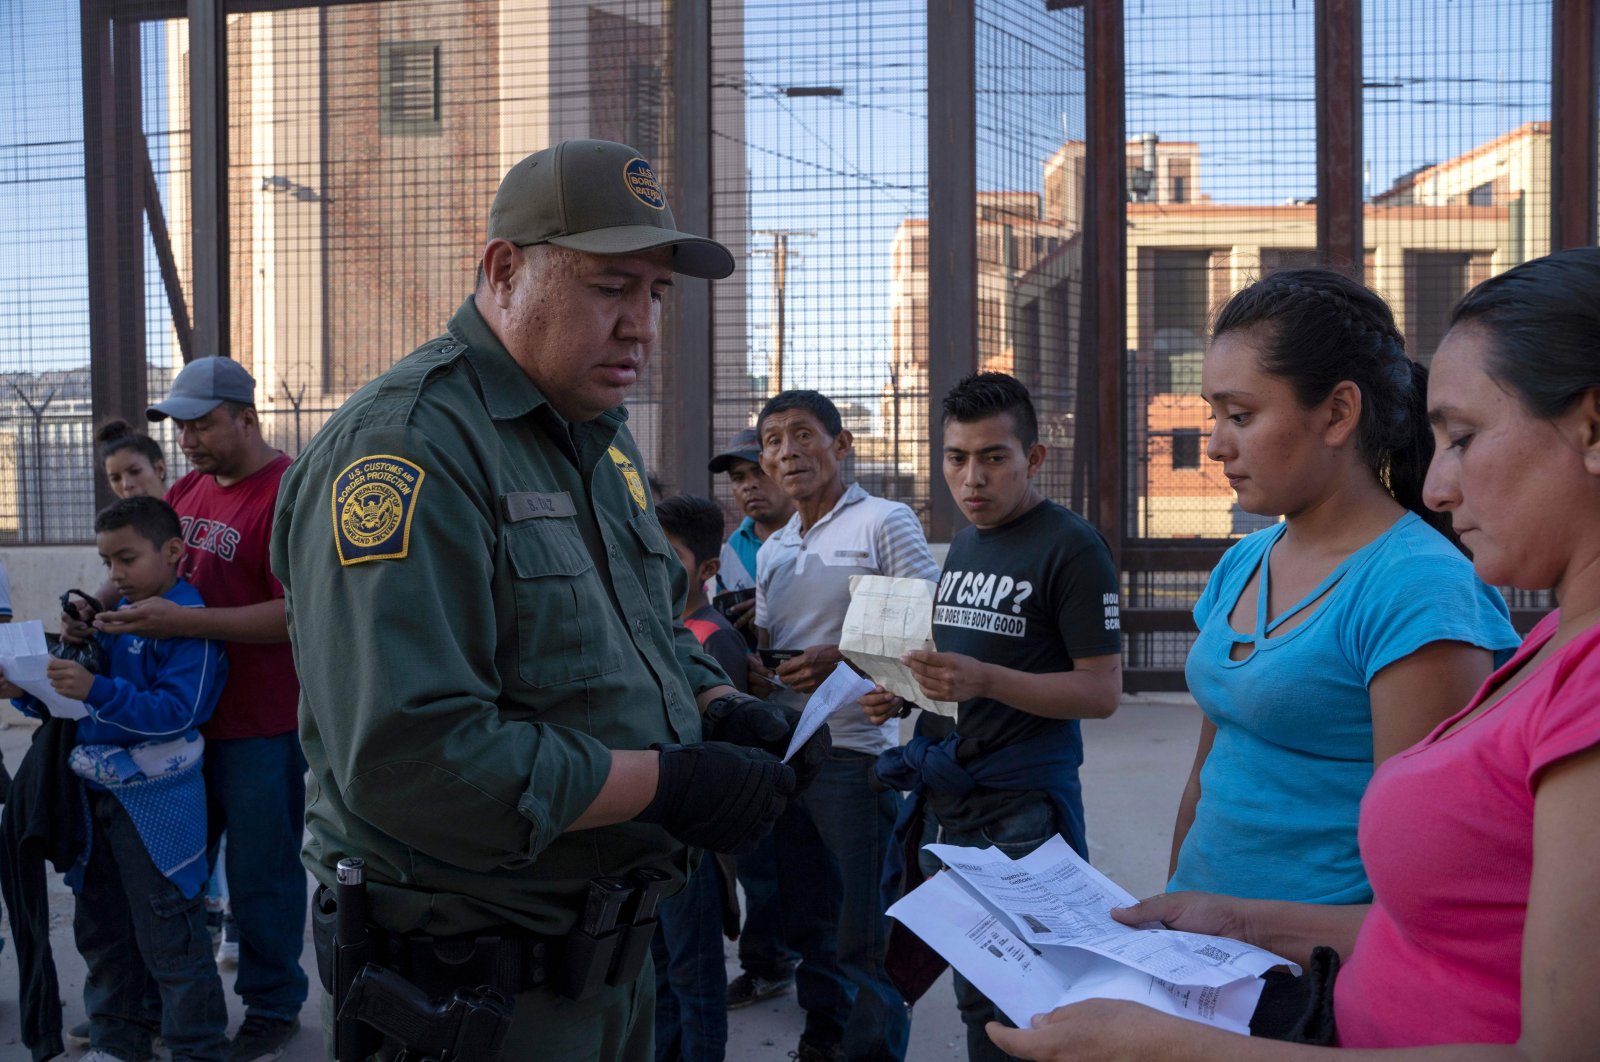 In this file photo taken on May 16, 2019, U.S. Customs and Border Protection agent checks documents of a small group of migrants, who crossed the Rio Grande from Juarez, Mexico, in El Paso, Texas. (AFP)